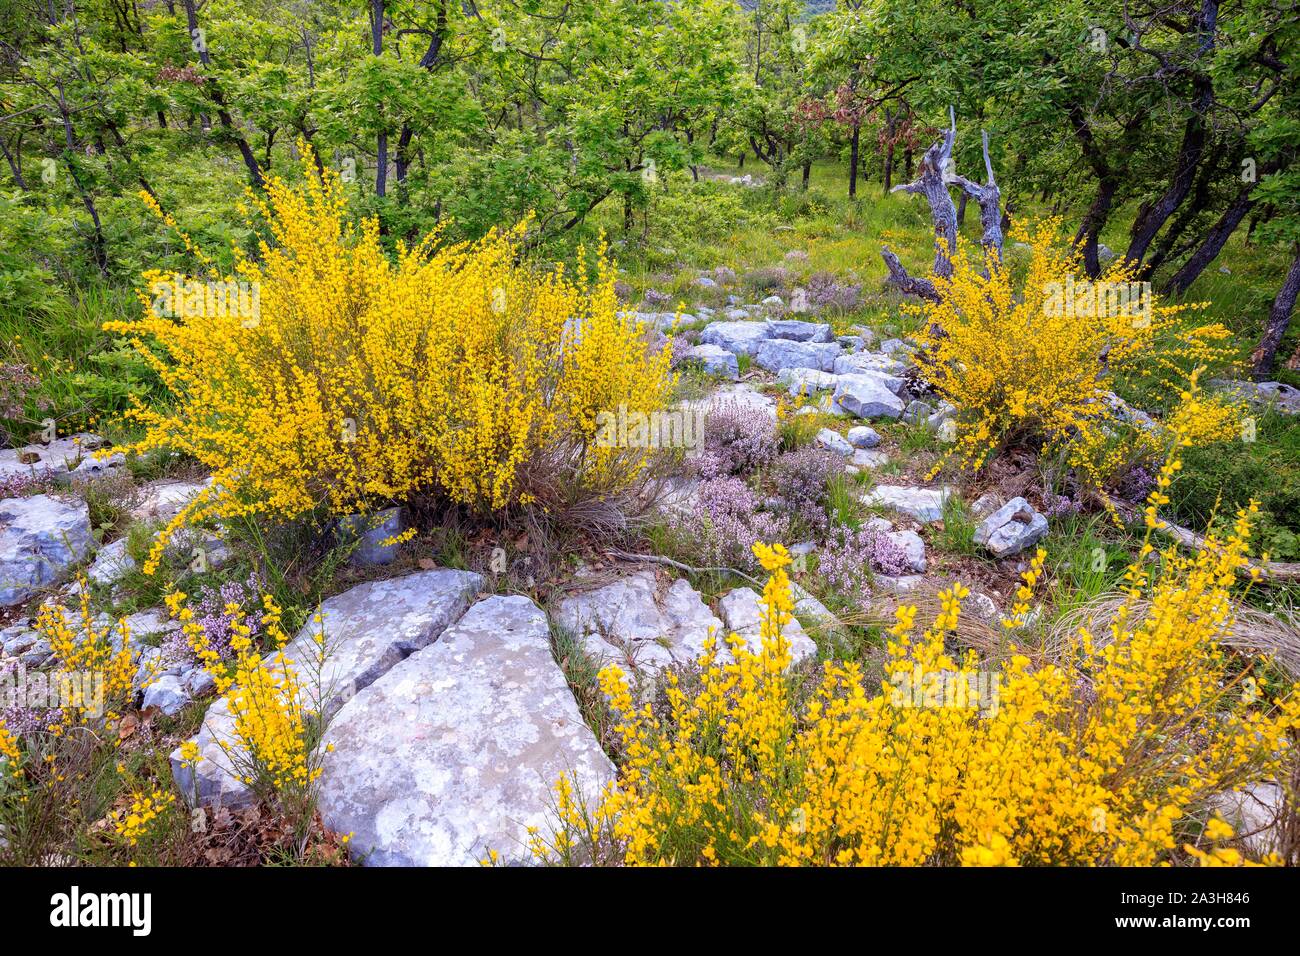 France, Alpes Maritimes, Regional Natural Park of the Prealpes d'Azur, Gourdon, flowering of the broom (Genista cinerea) and wild thyme (Thymus vulgaris) Stock Photo